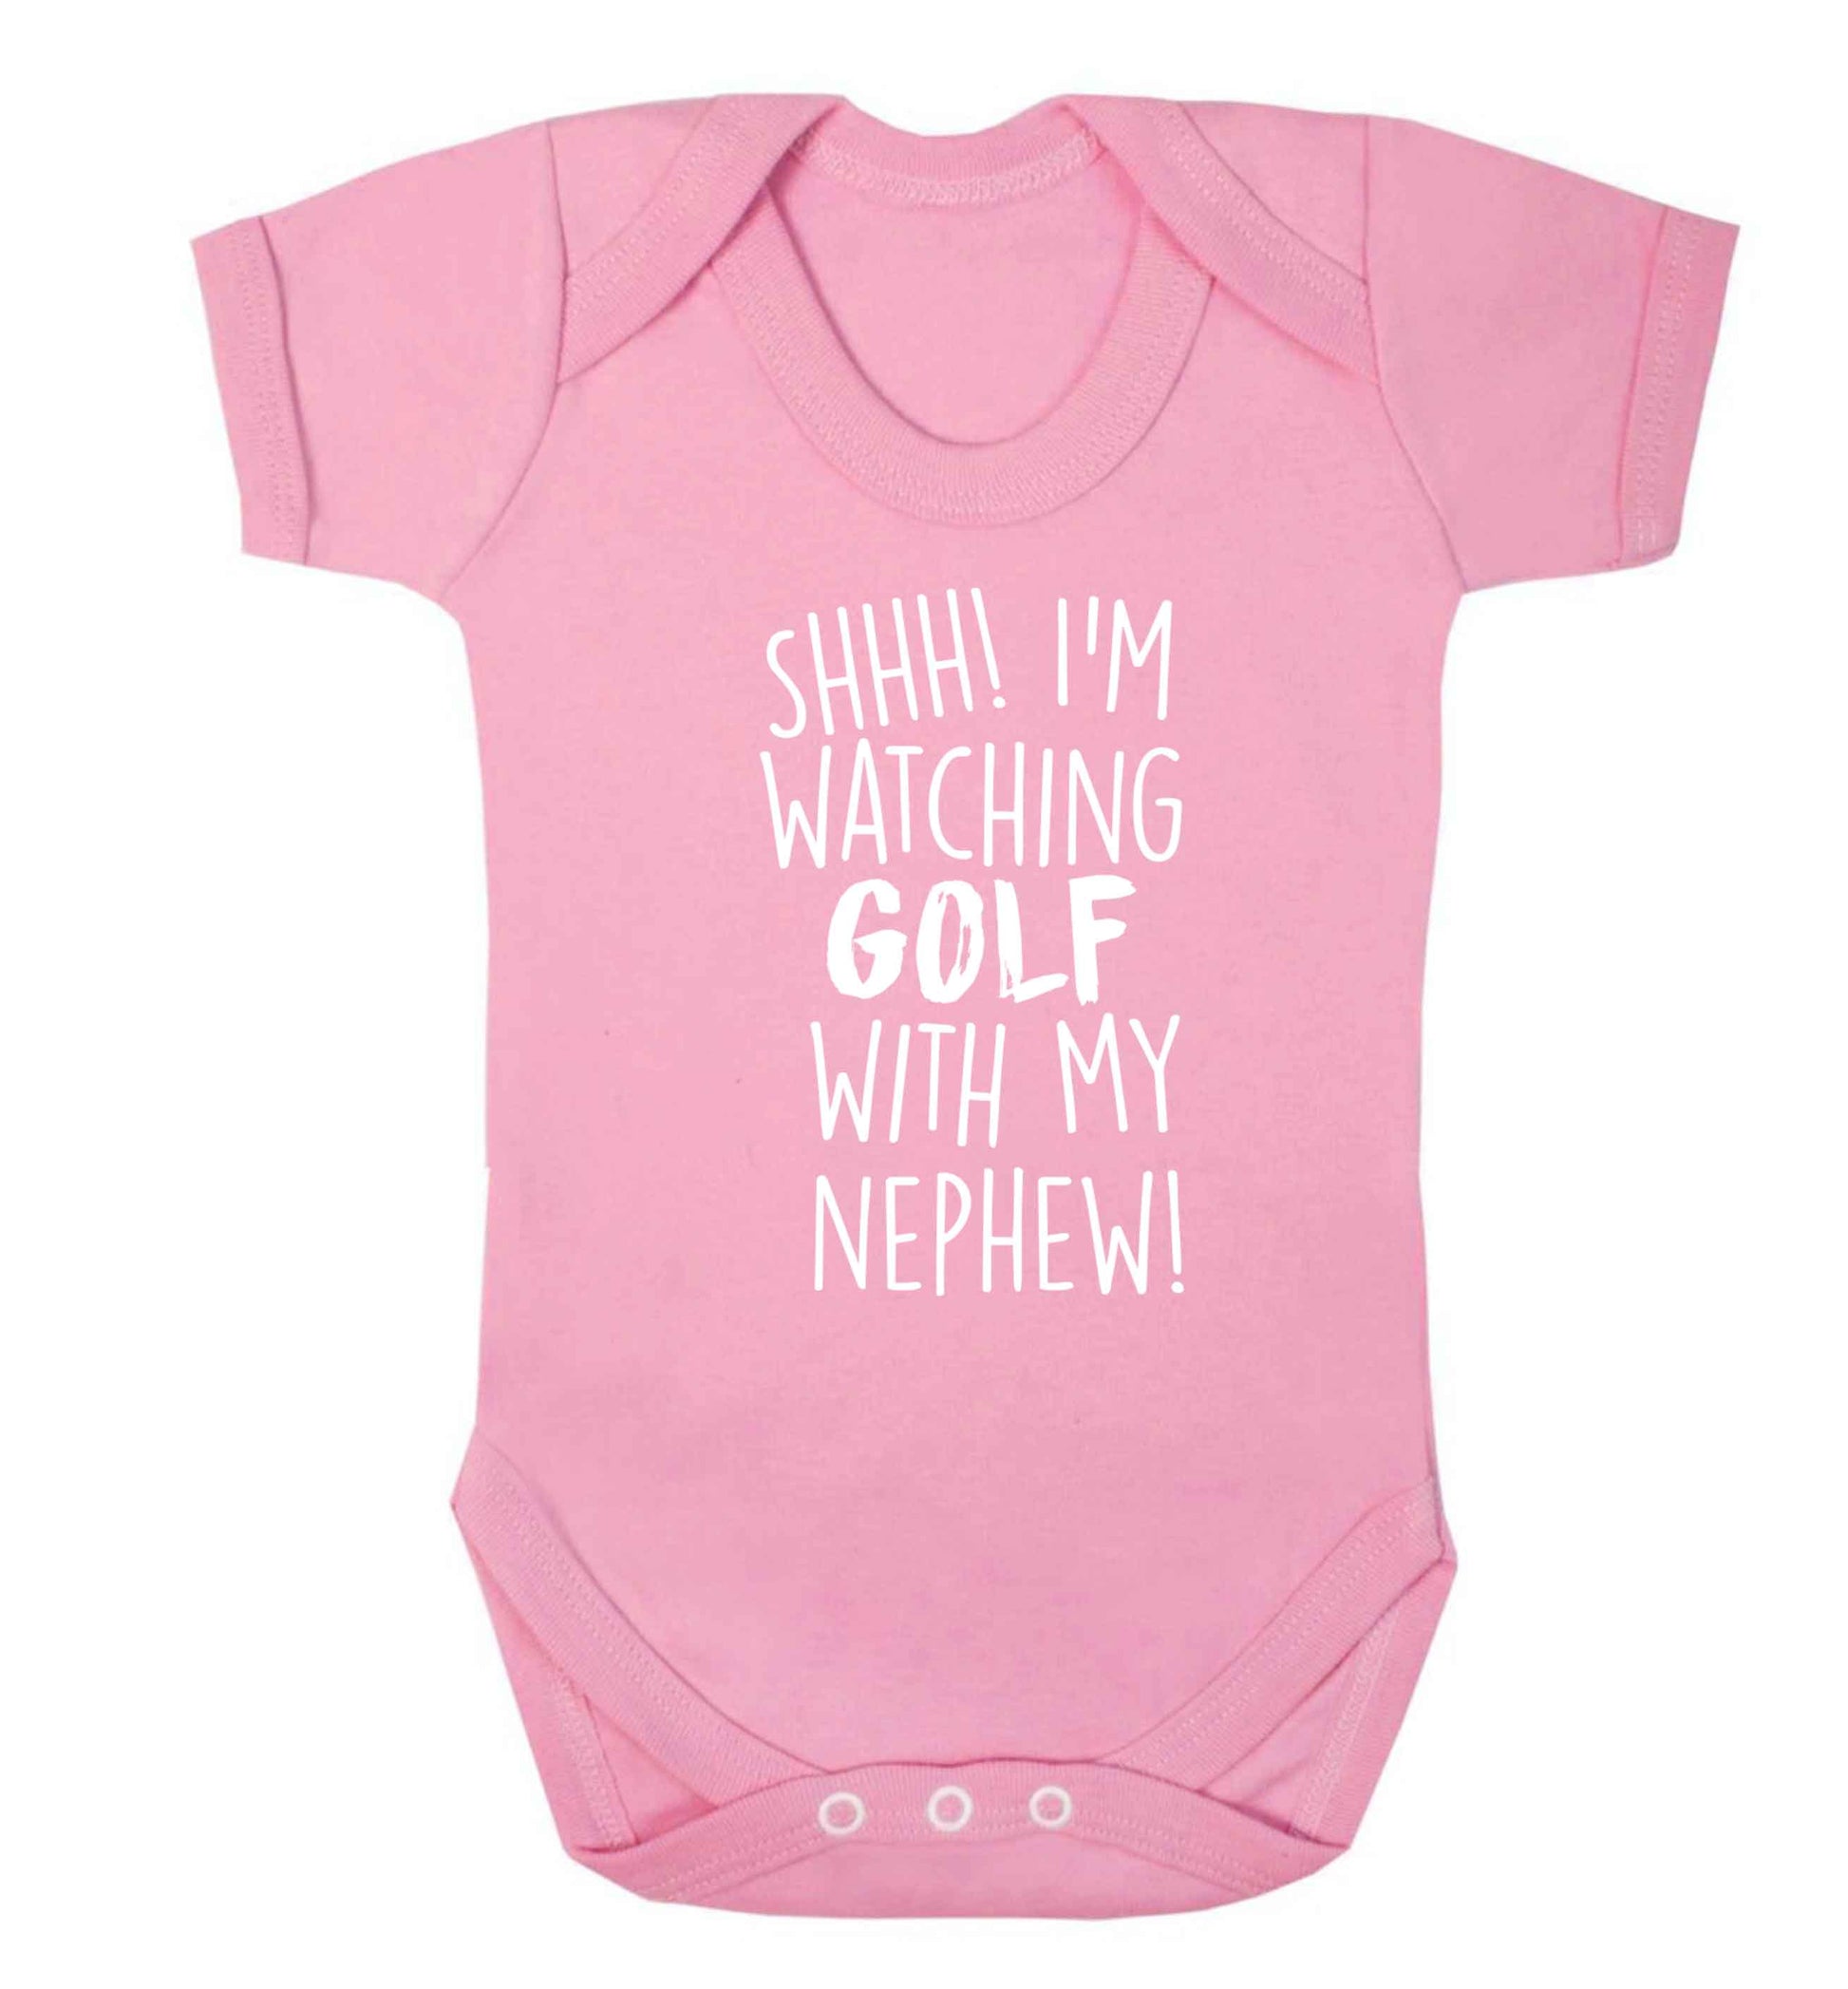 Shh I'm watching golf with my nephew Baby Vest pale pink 18-24 months